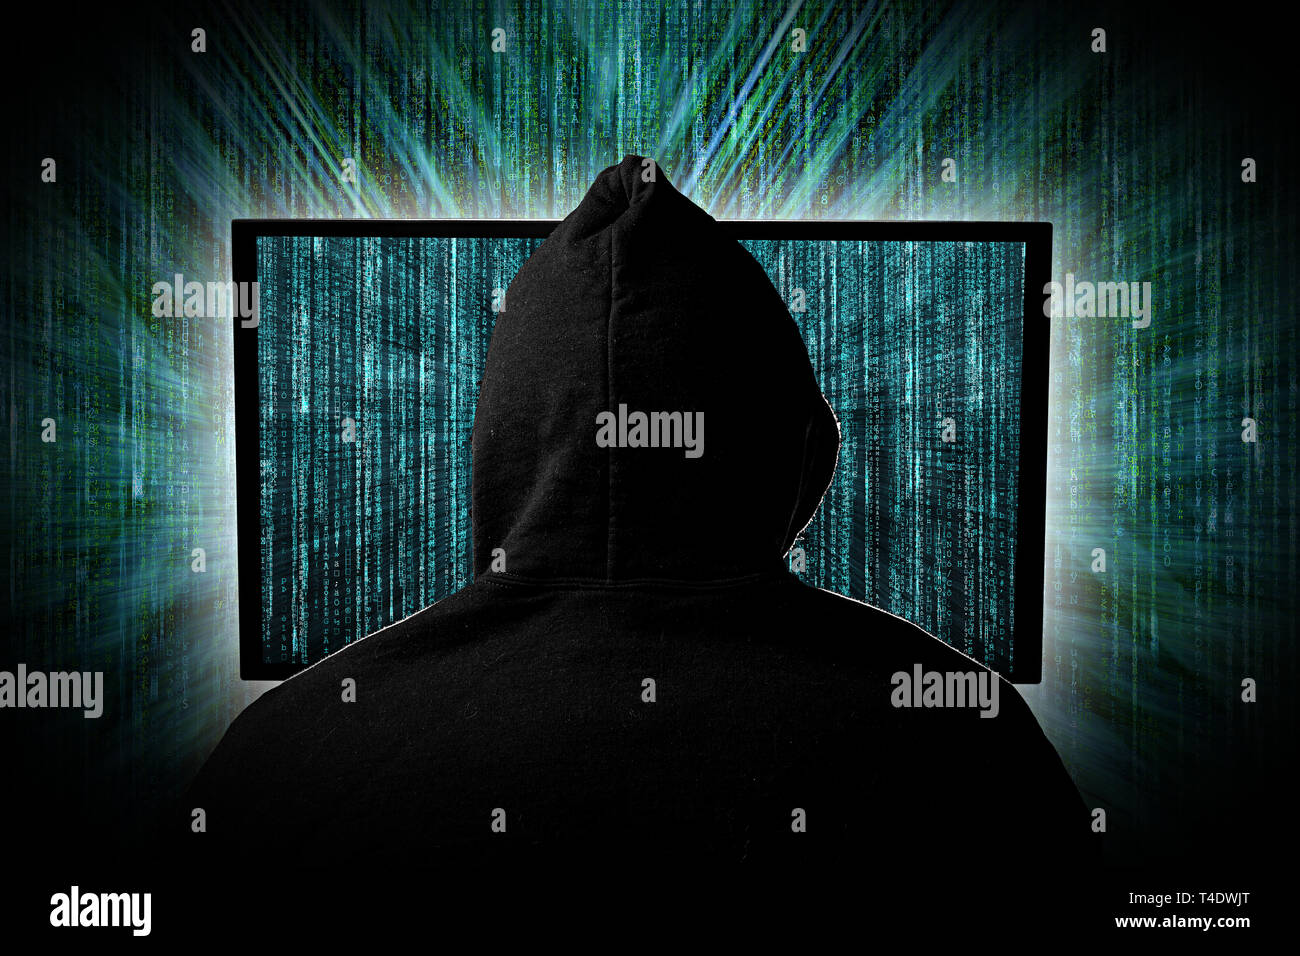 hacker  behind glowing computer monitor display in front of green source binary code background internet cyber hack attack computer concept Stock Photo